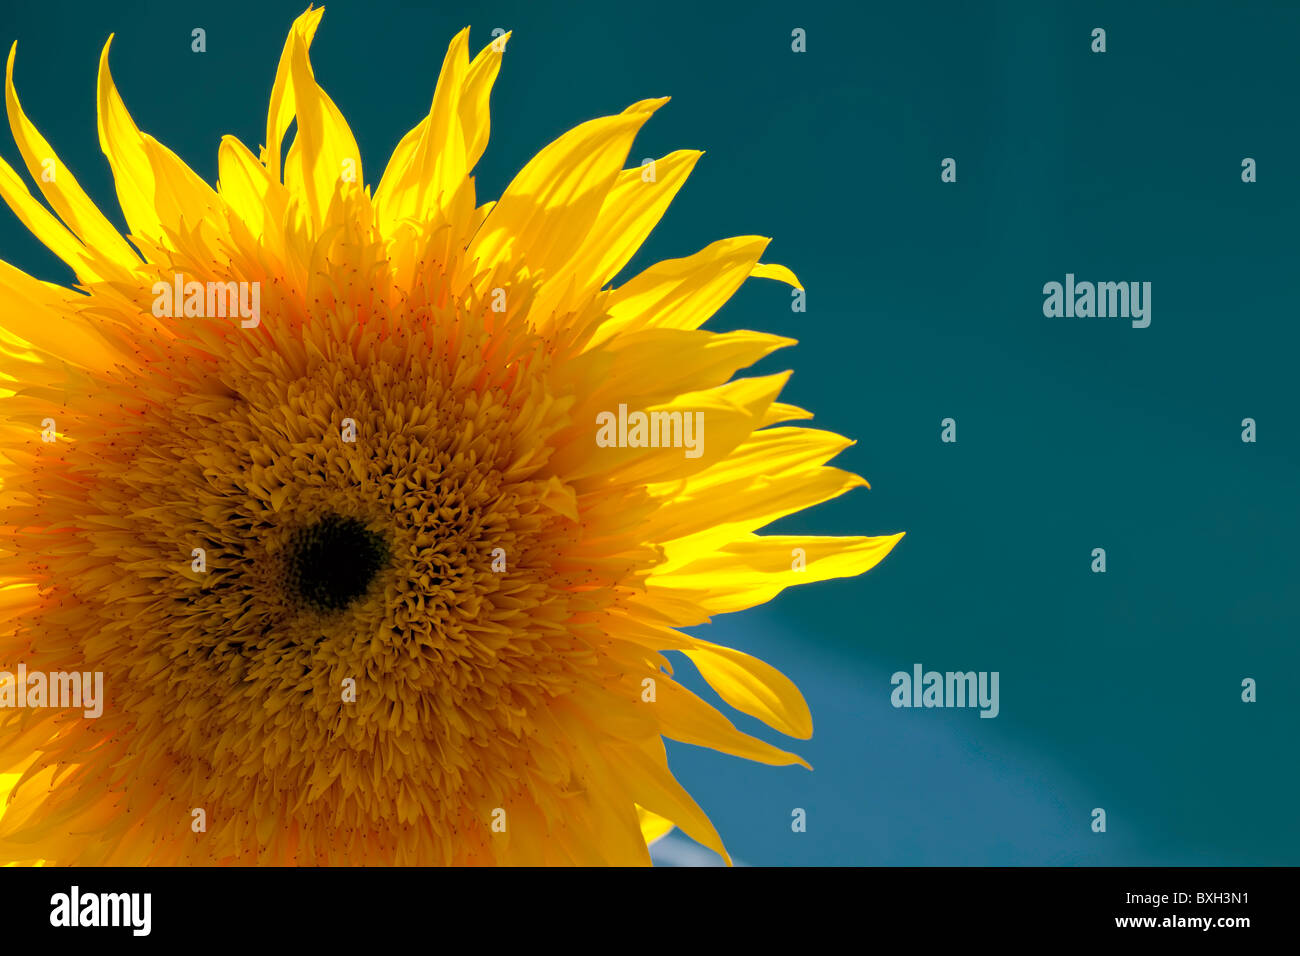 Yellow Chrysanthemum Against a Blue Background Stock Photo